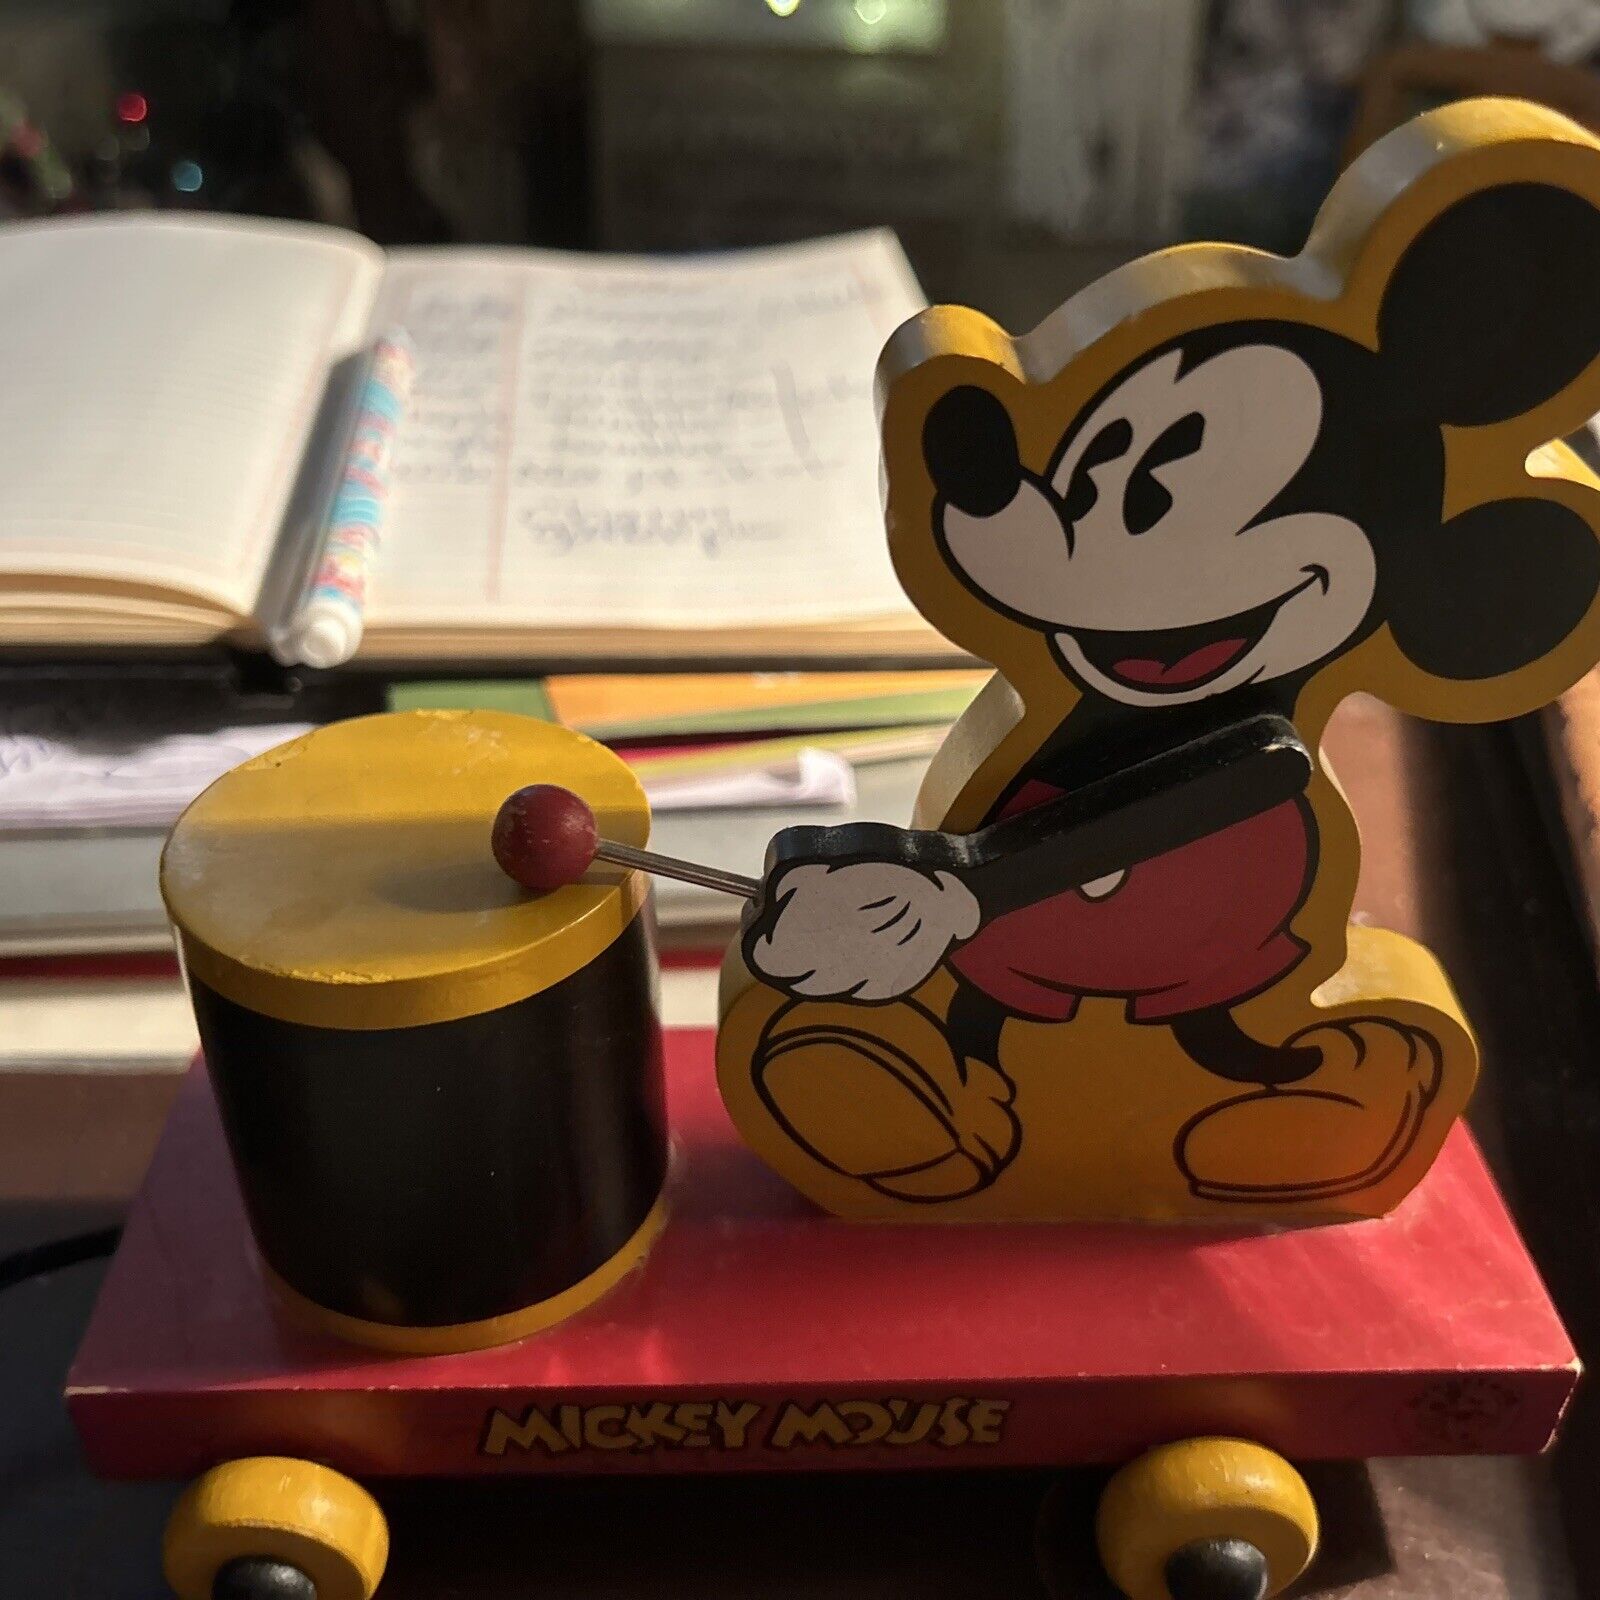 Fossil Mickey Mouse drummer wooden toy watch holder Mickey Mouse, and Company